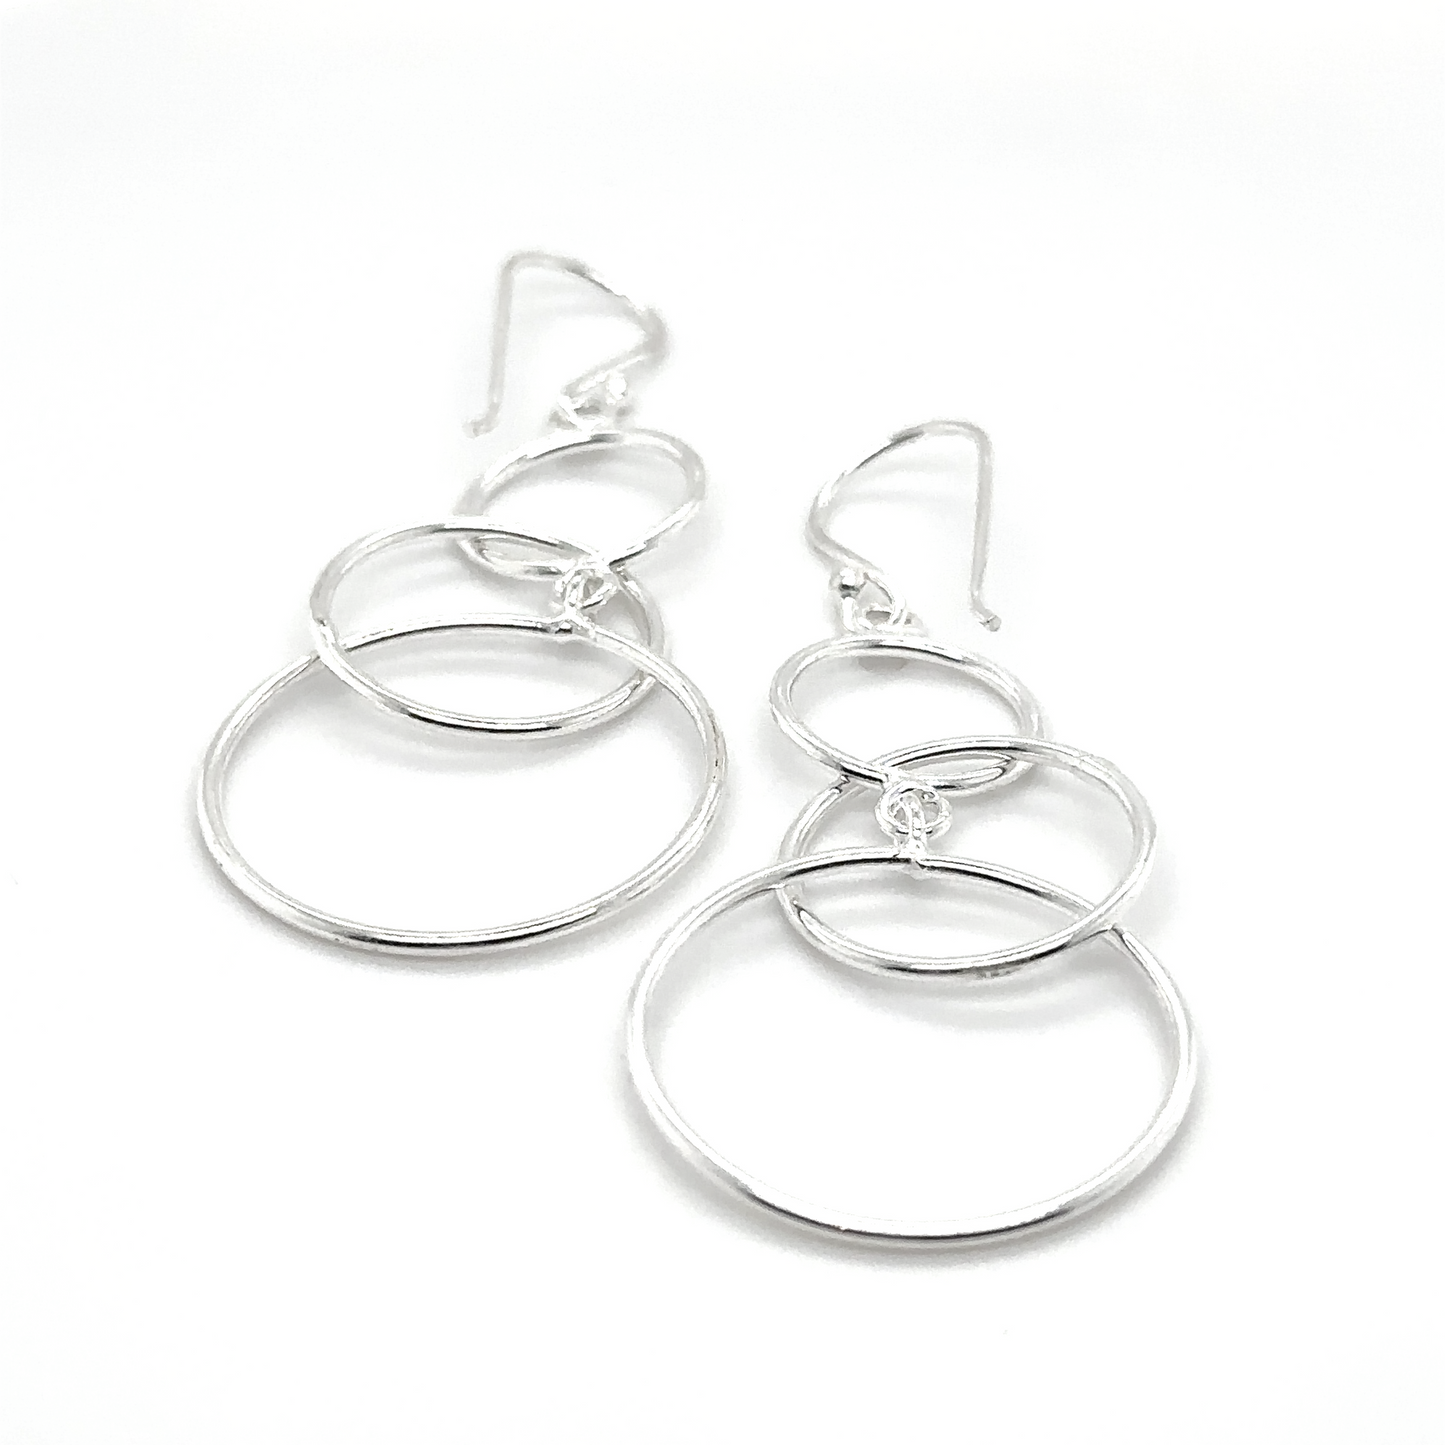 A comfortable to wear pair of Super Silver Interlocked Circles Earrings on a white background.